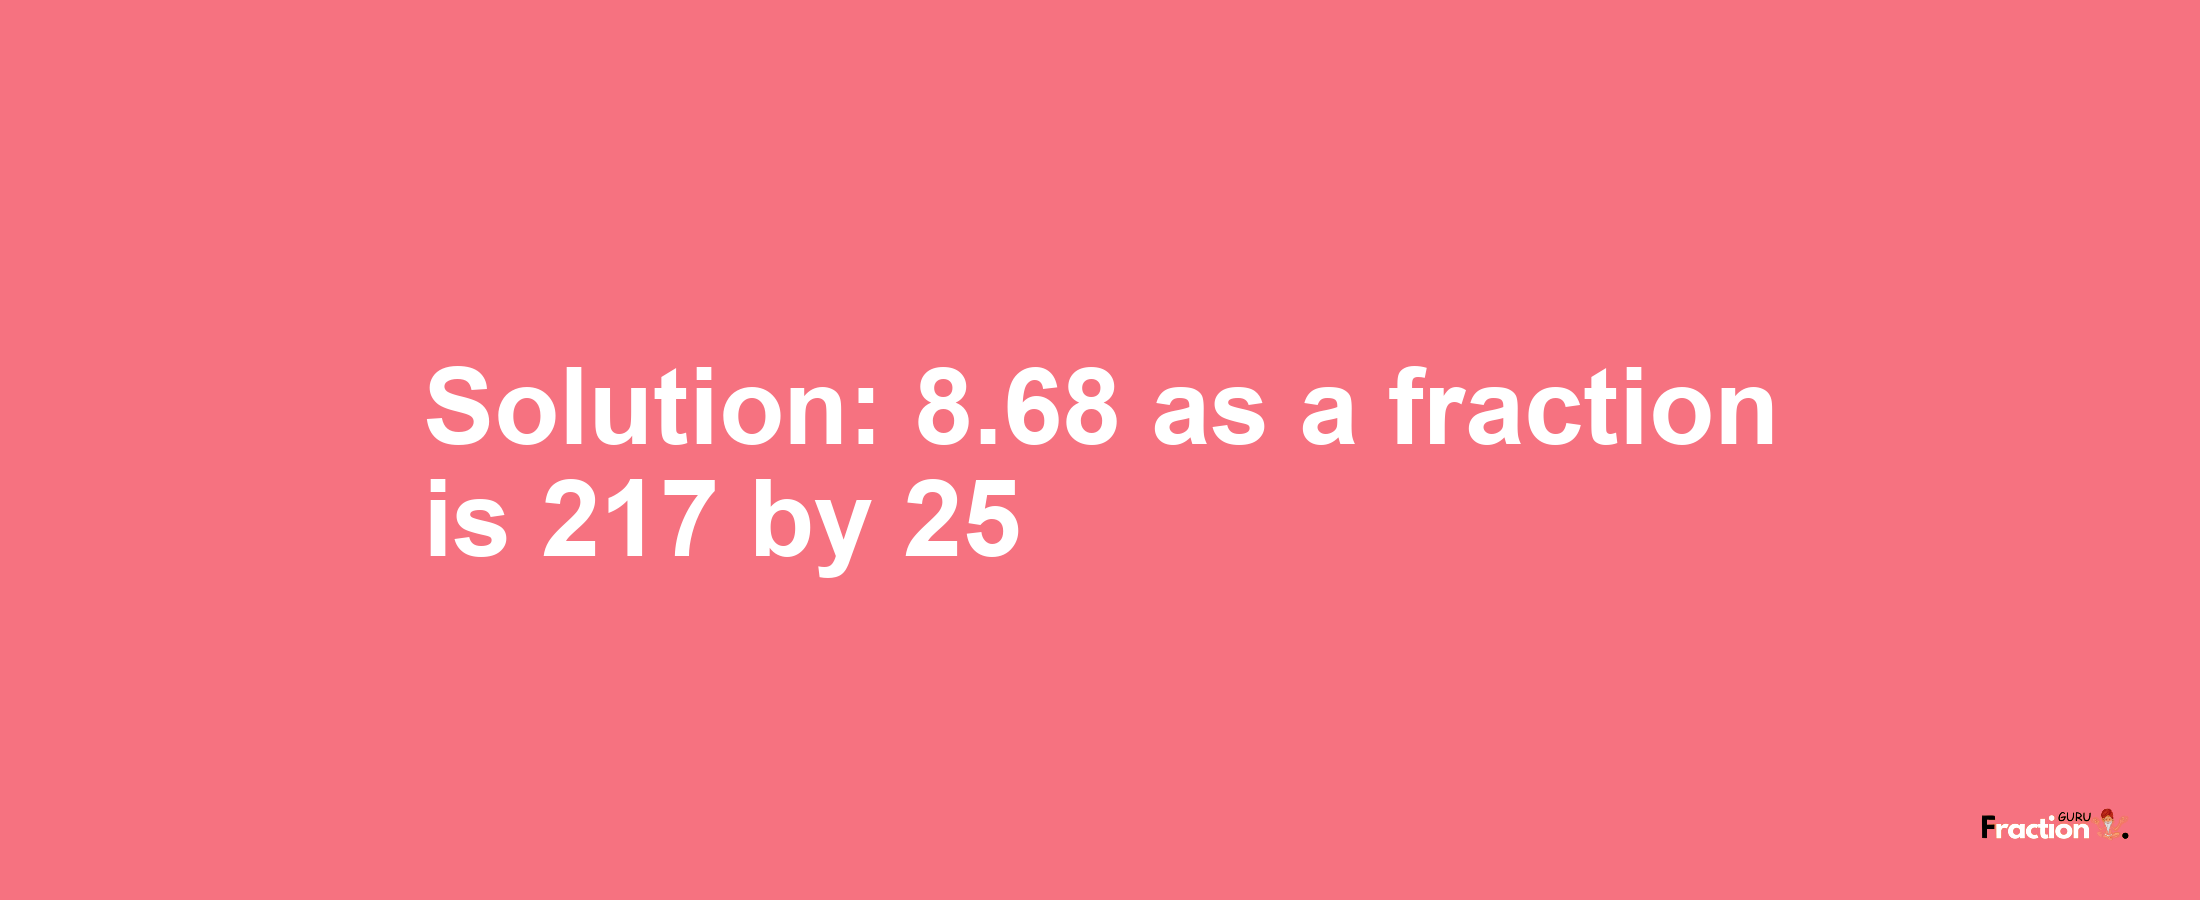 Solution:8.68 as a fraction is 217/25